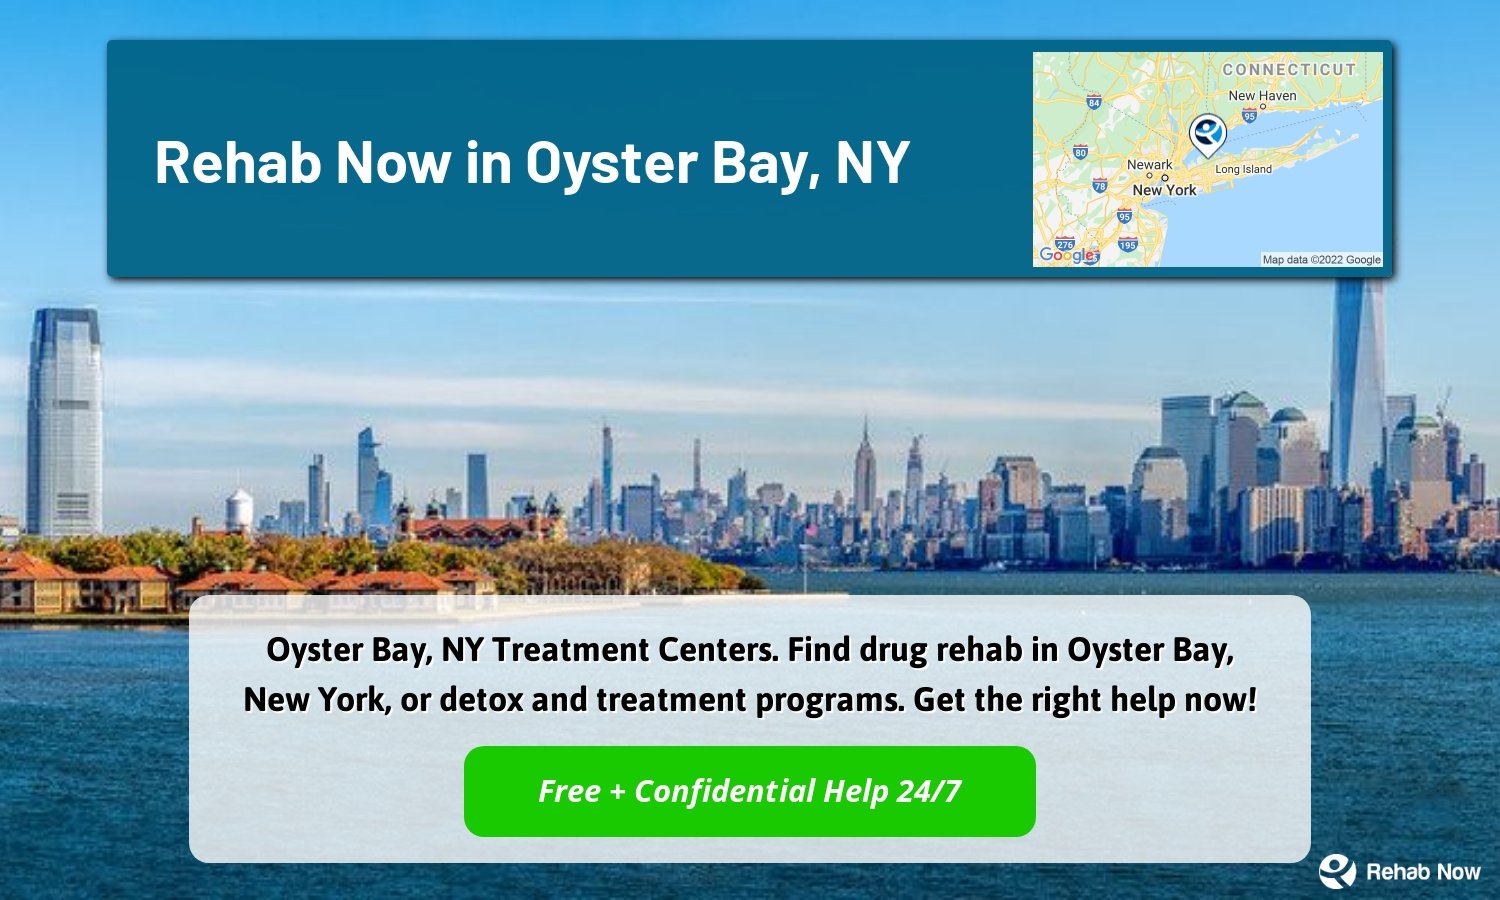 Oyster Bay, NY Treatment Centers. Find drug rehab in Oyster Bay, New York, or detox and treatment programs. Get the right help now!